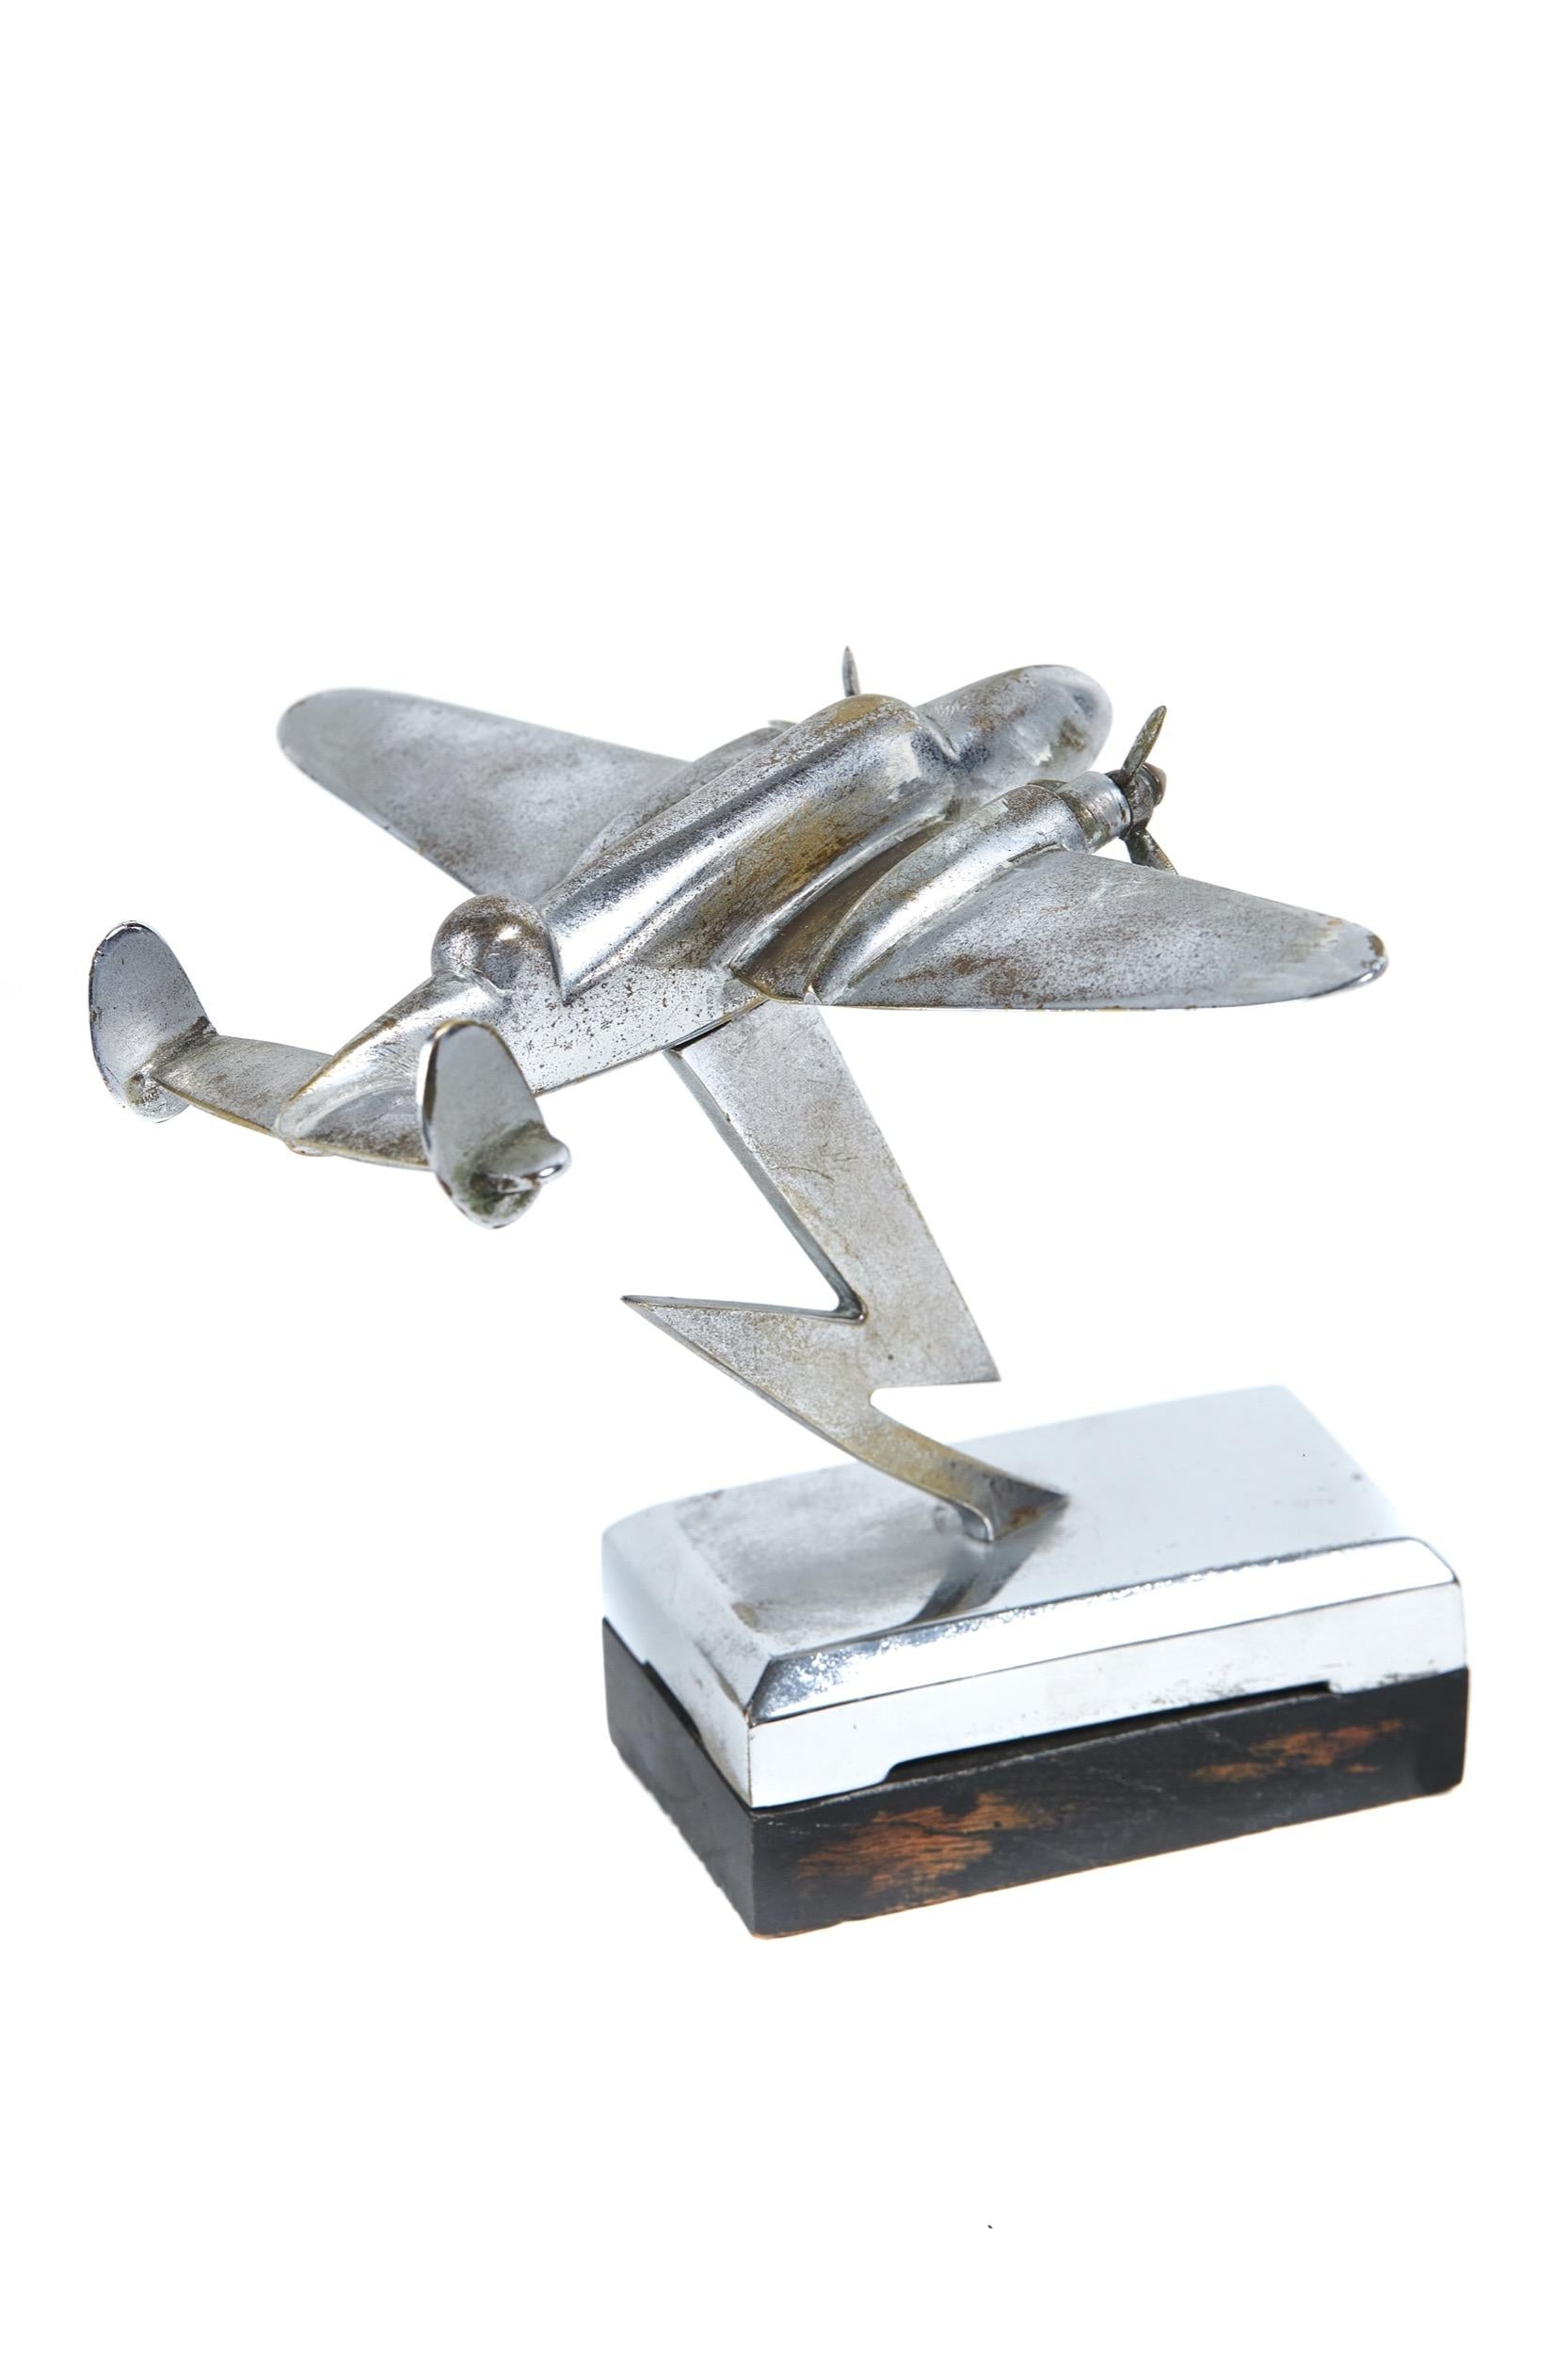 vintage Chrome model of WW11 Bomber Airplane on stand 
Circa 1930s
Chrome plated on Brass, 
Lightning Stylised support 
Chrome Rectangular base mounted on black wood base
Green Baize Underneath
Chrome Plated Worn